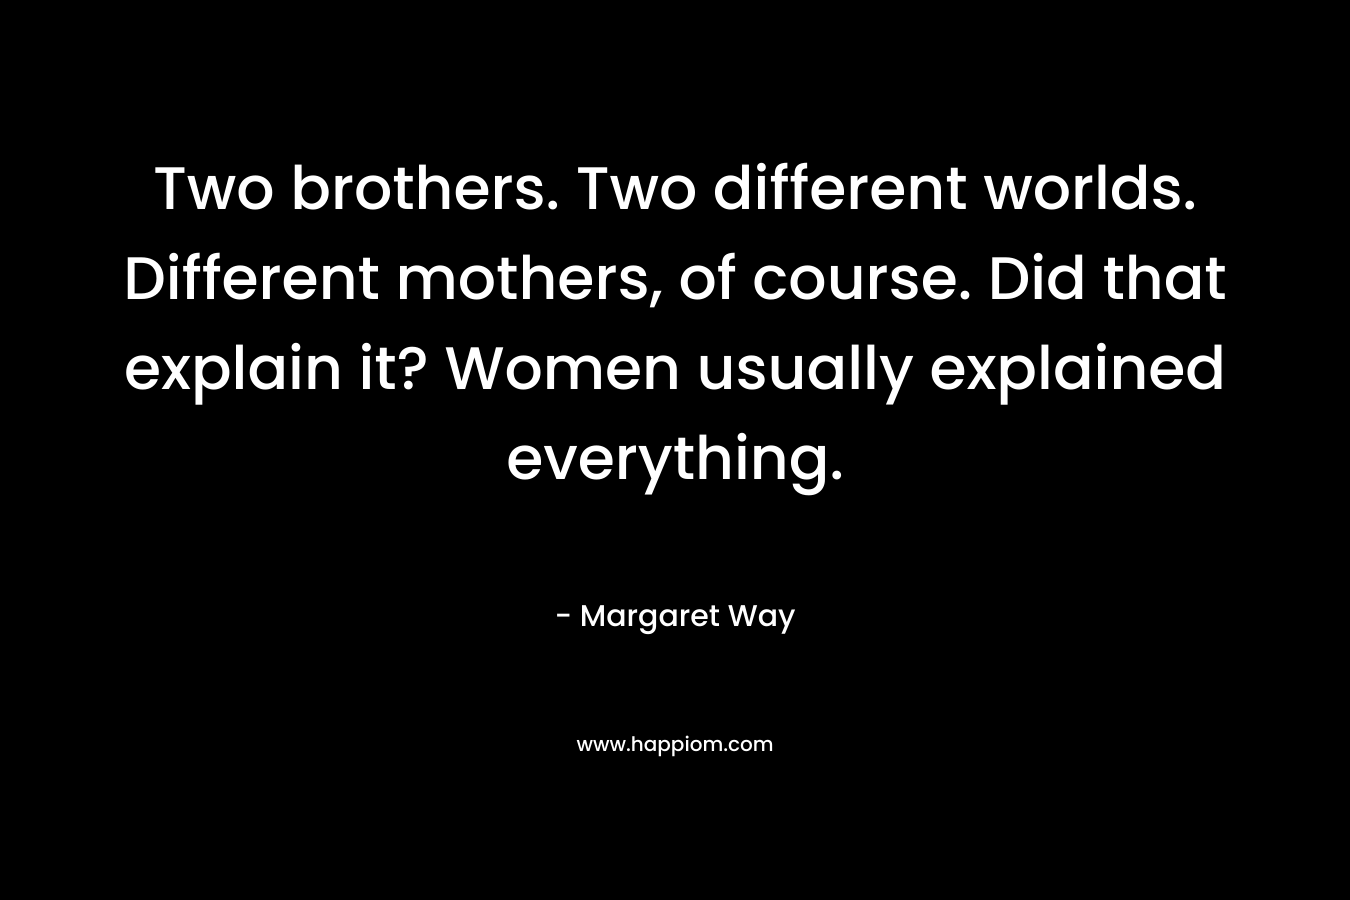 Two brothers. Two different worlds. Different mothers, of course. Did that explain it? Women usually explained everything.